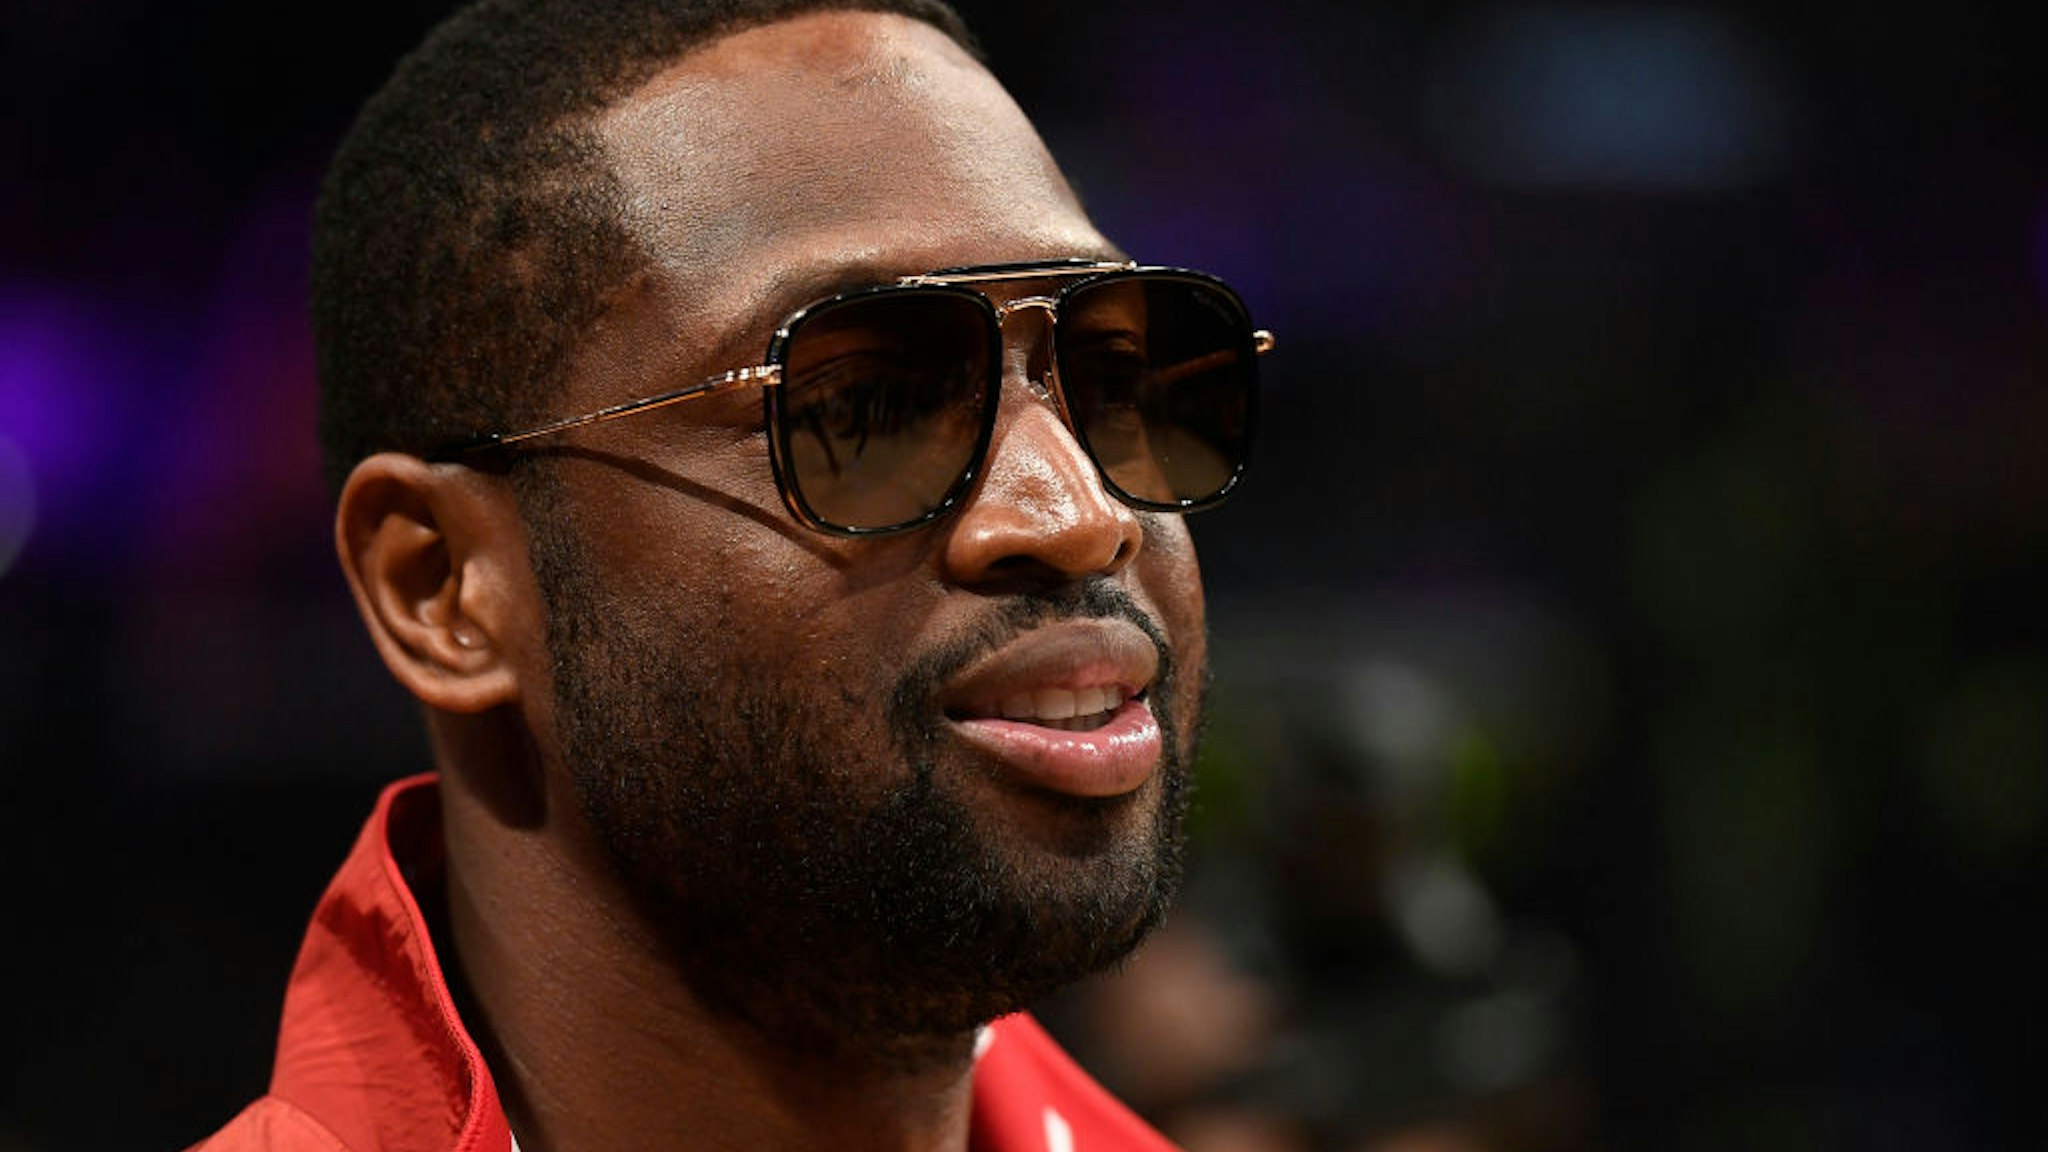 Former Miami Heat player Dwyane Wade attends the game between the Miami Heat and Los Angeles Lakers at Staples Center on November 8, 2019 in Los Angeles, California.